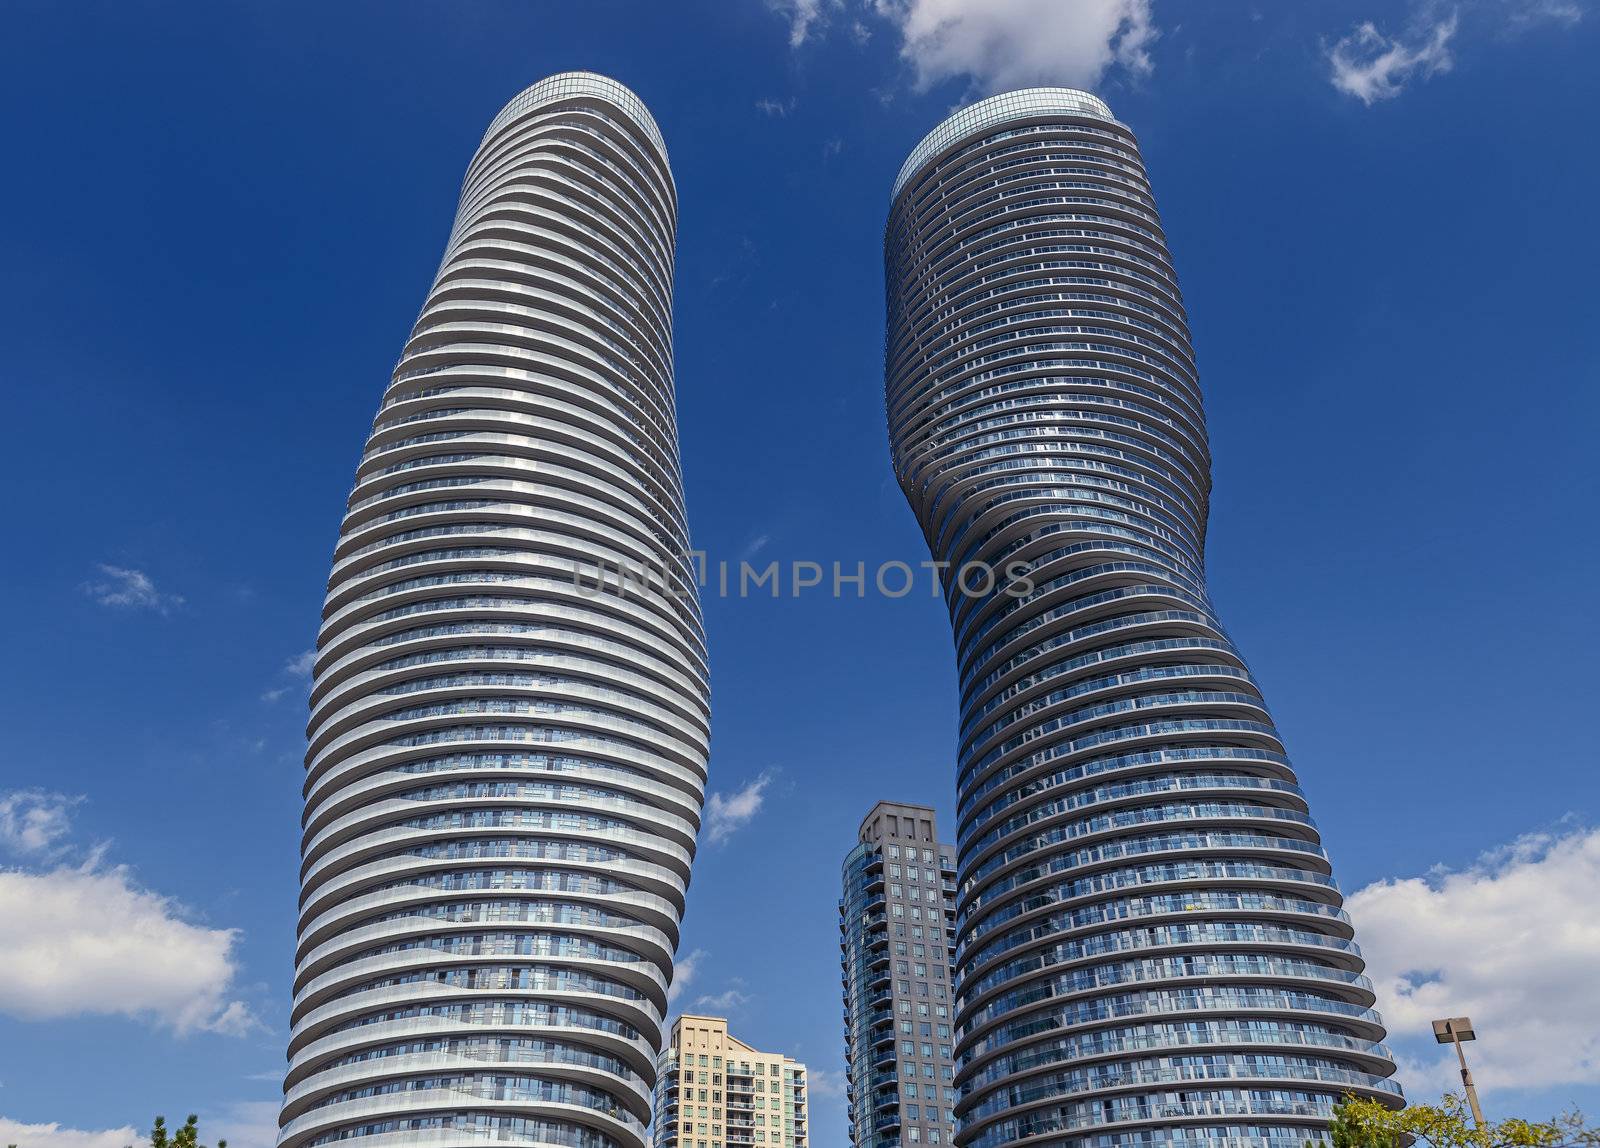 The Absolute World condominium Towers in the city center of Mississauga Ontario on a sunny afternoon. The hourglass shaped tower has been nicknamed the Marilyn Monroe tower due to the curvy shape. 